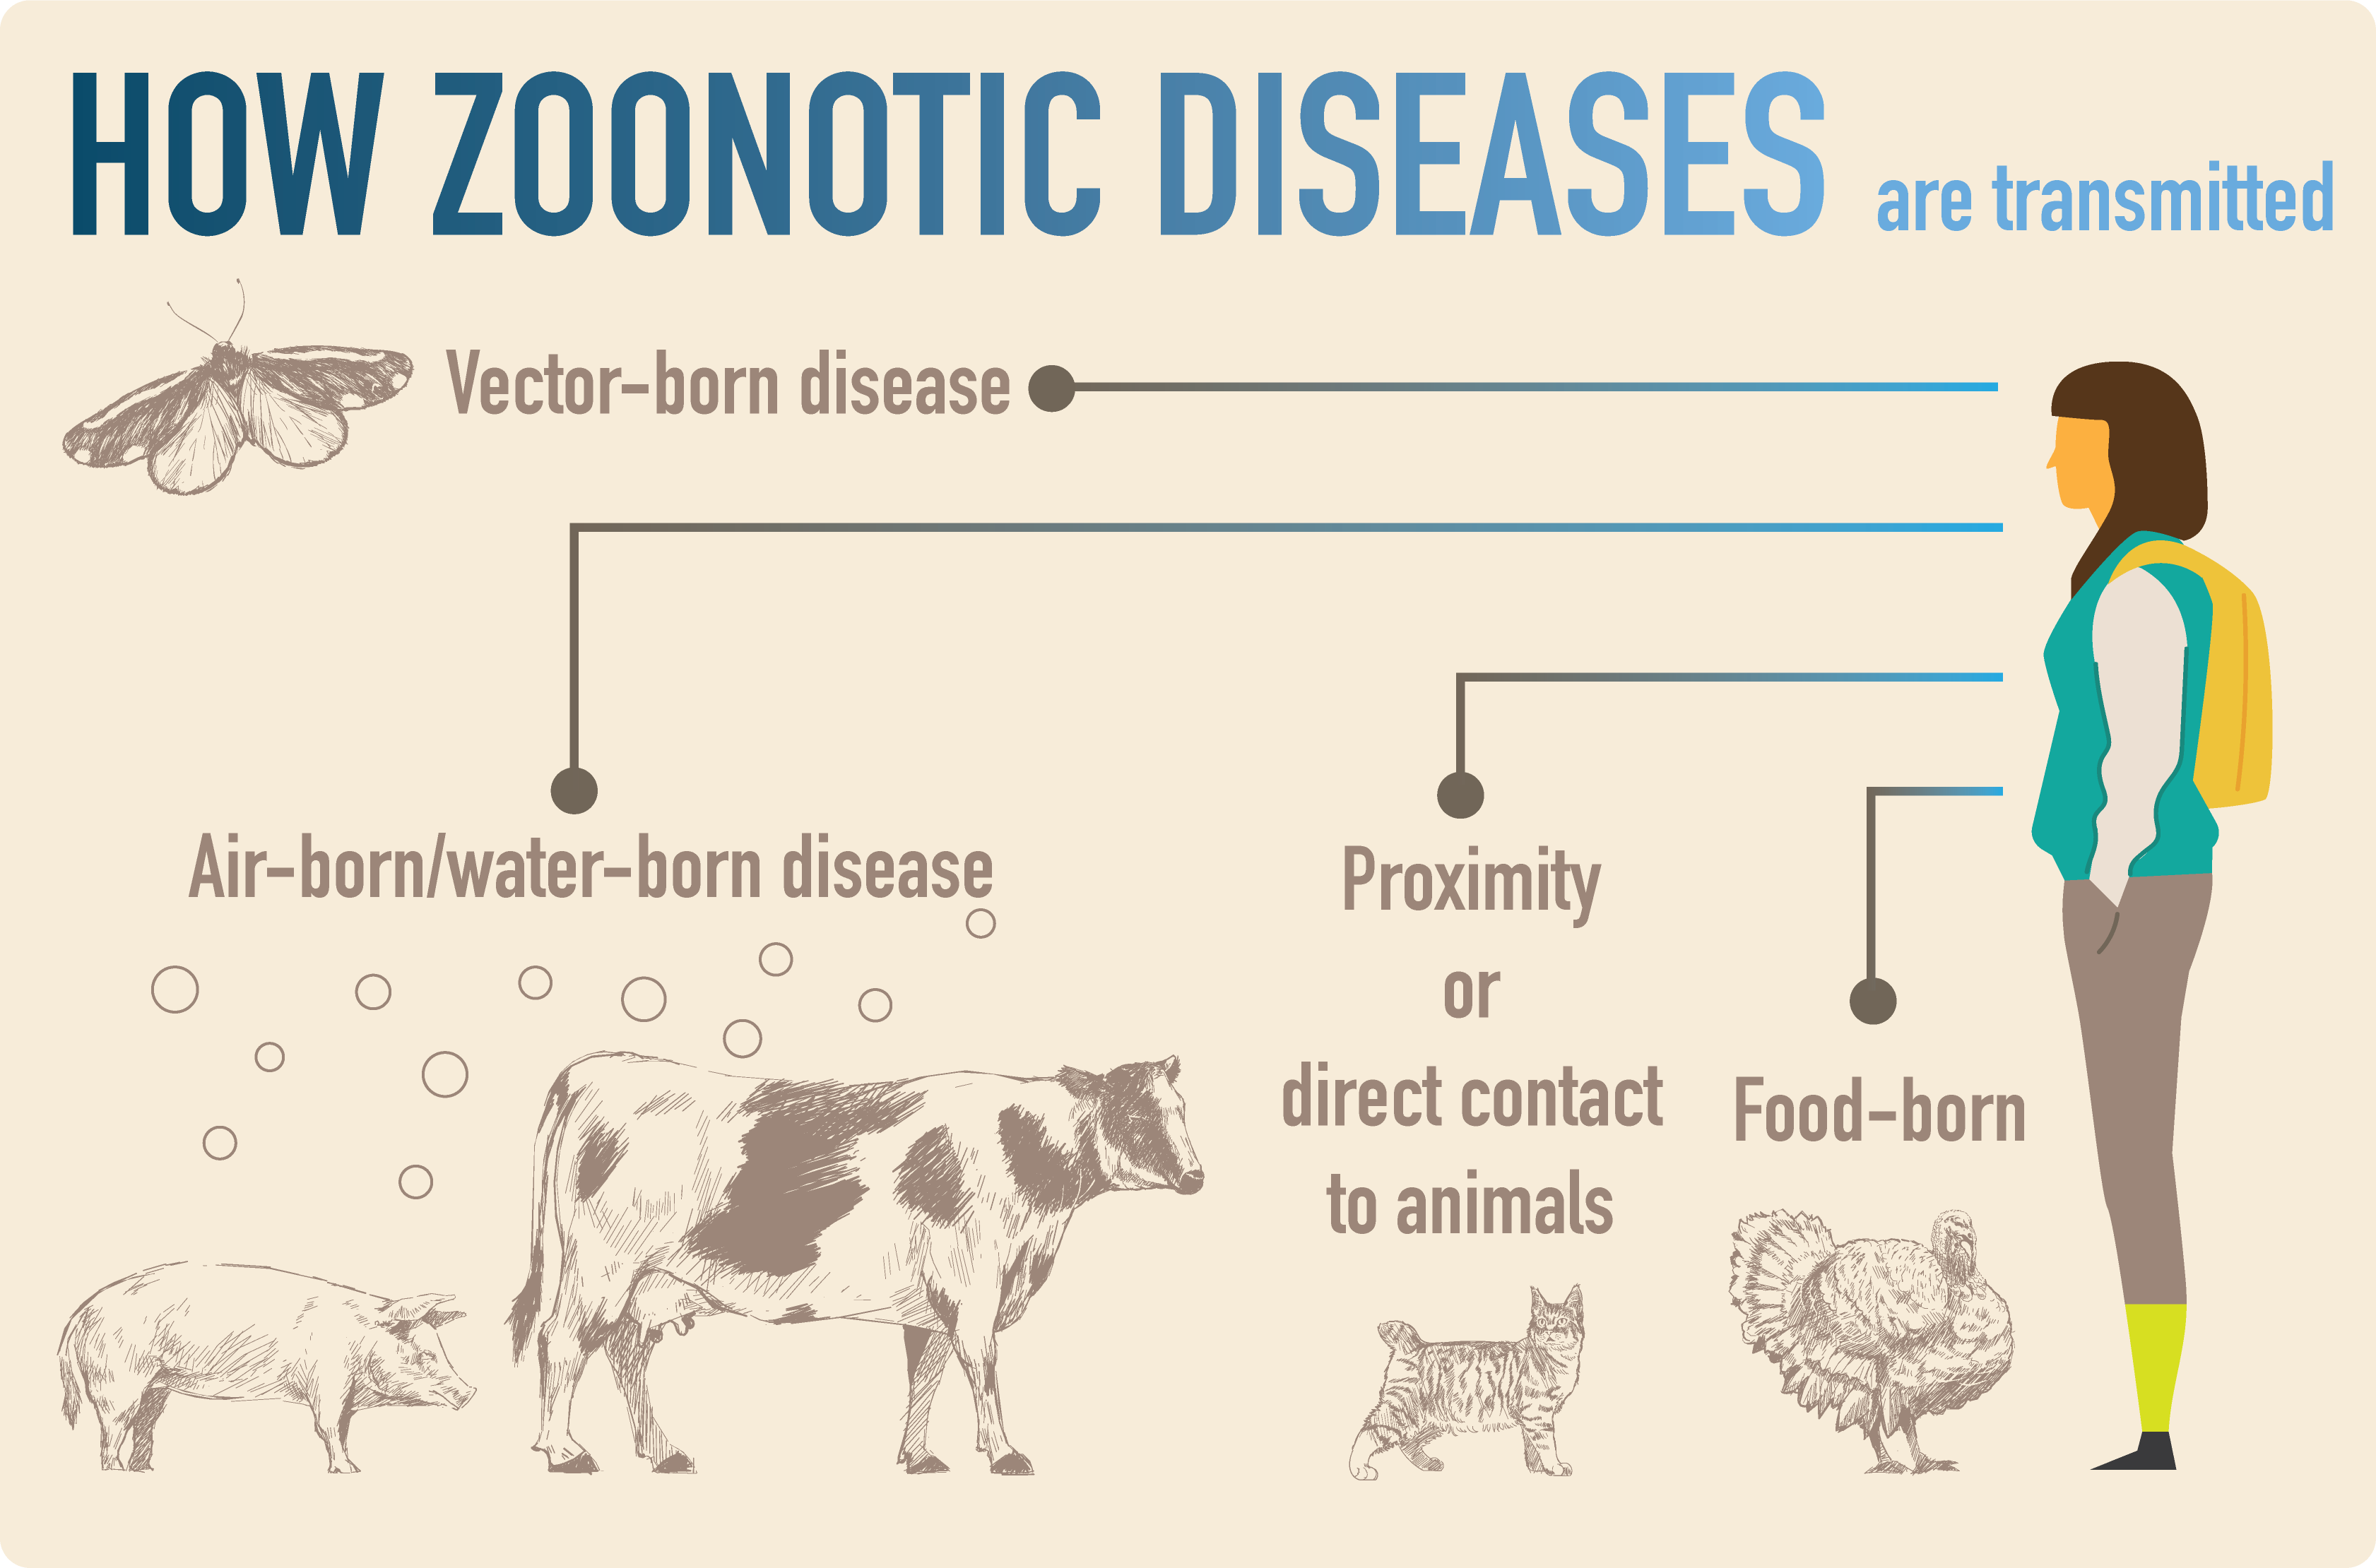 Climate: Past, Present & Future | Are the risks of zoonotic ...